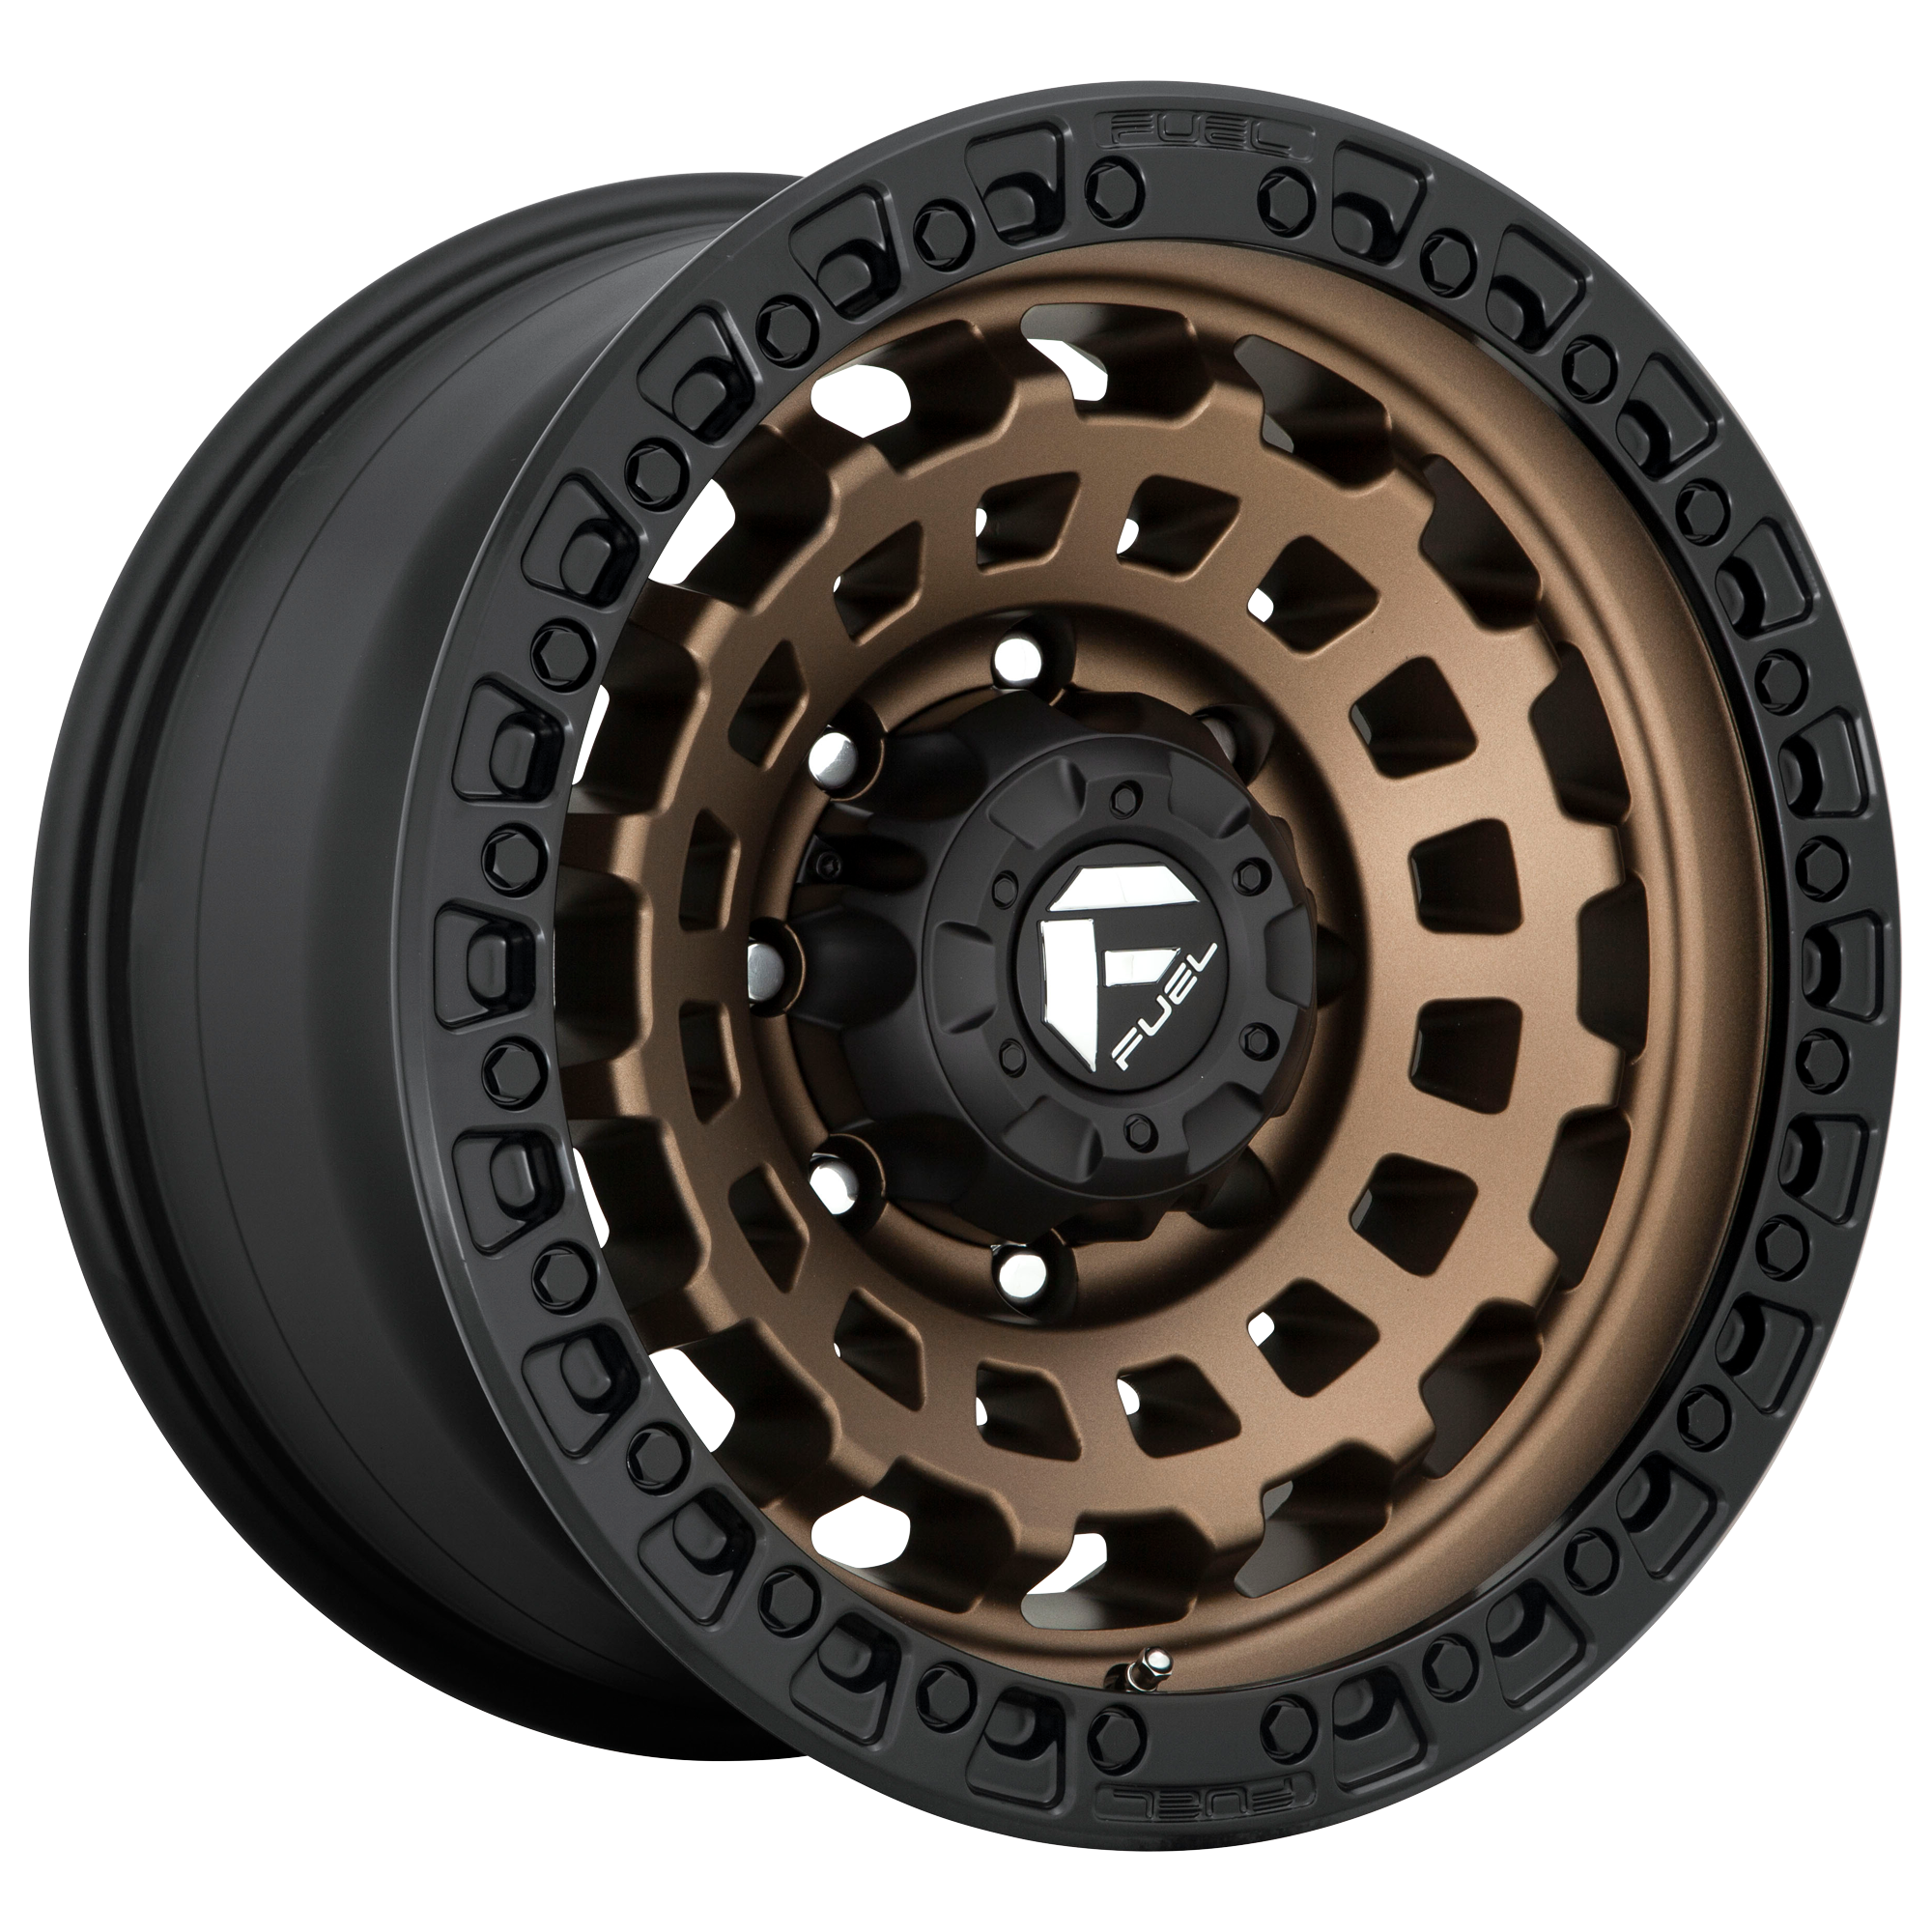 ZEPHYR 20x9 6x139.70 MATTE BRONZE BLACK BEAD RING (20 mm) - Tires and Engine Performance